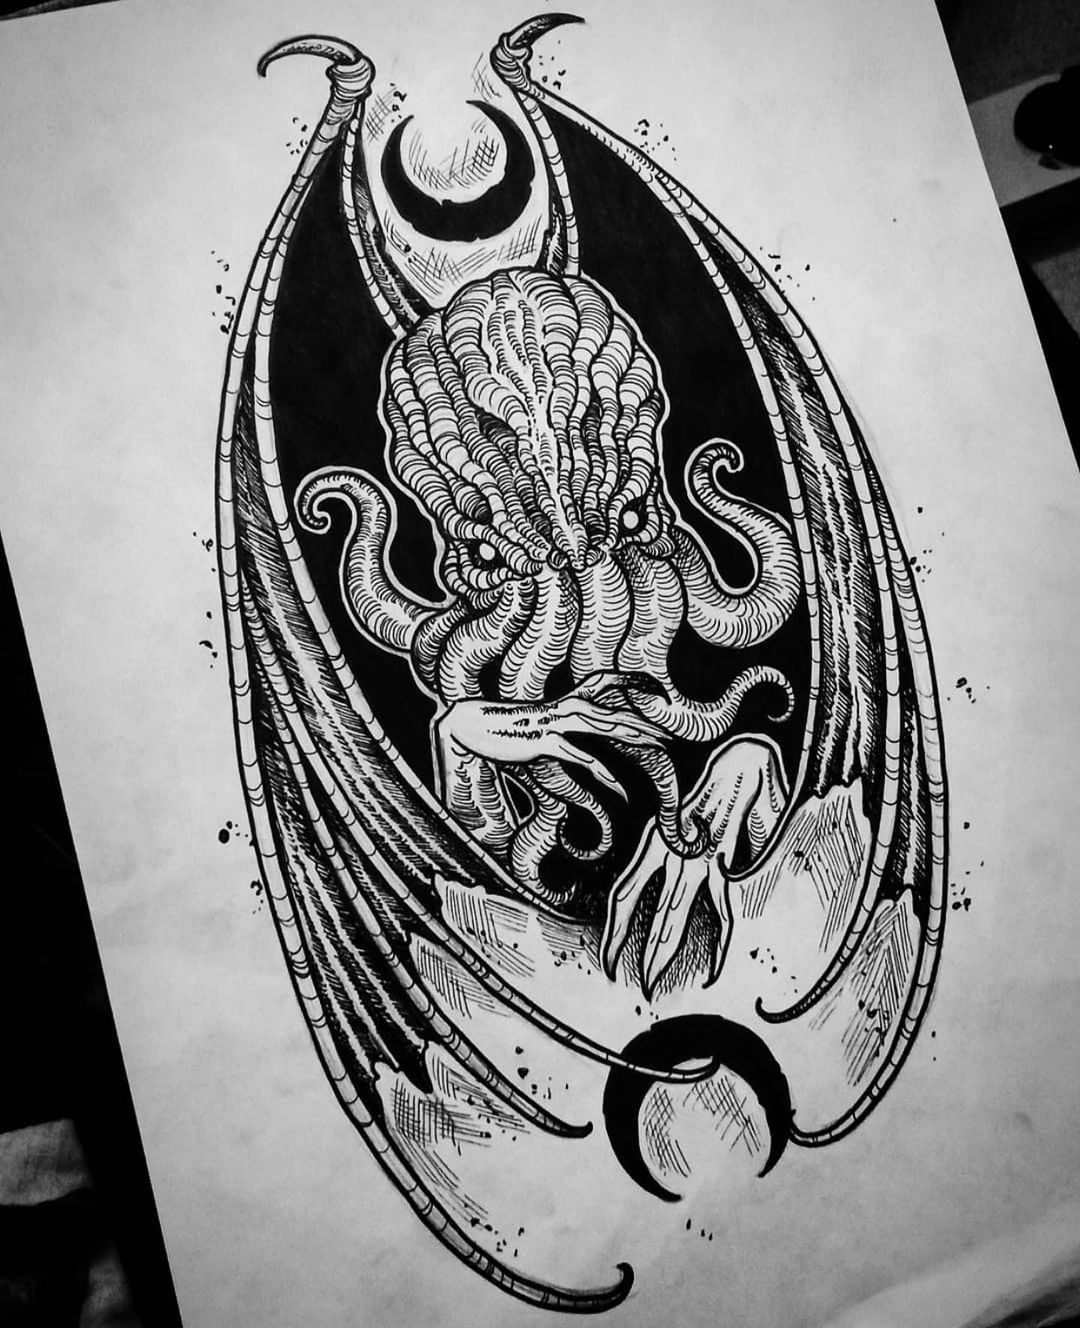 Cthulhu (this is a proper noun and does not have a direct translation in Spanish)